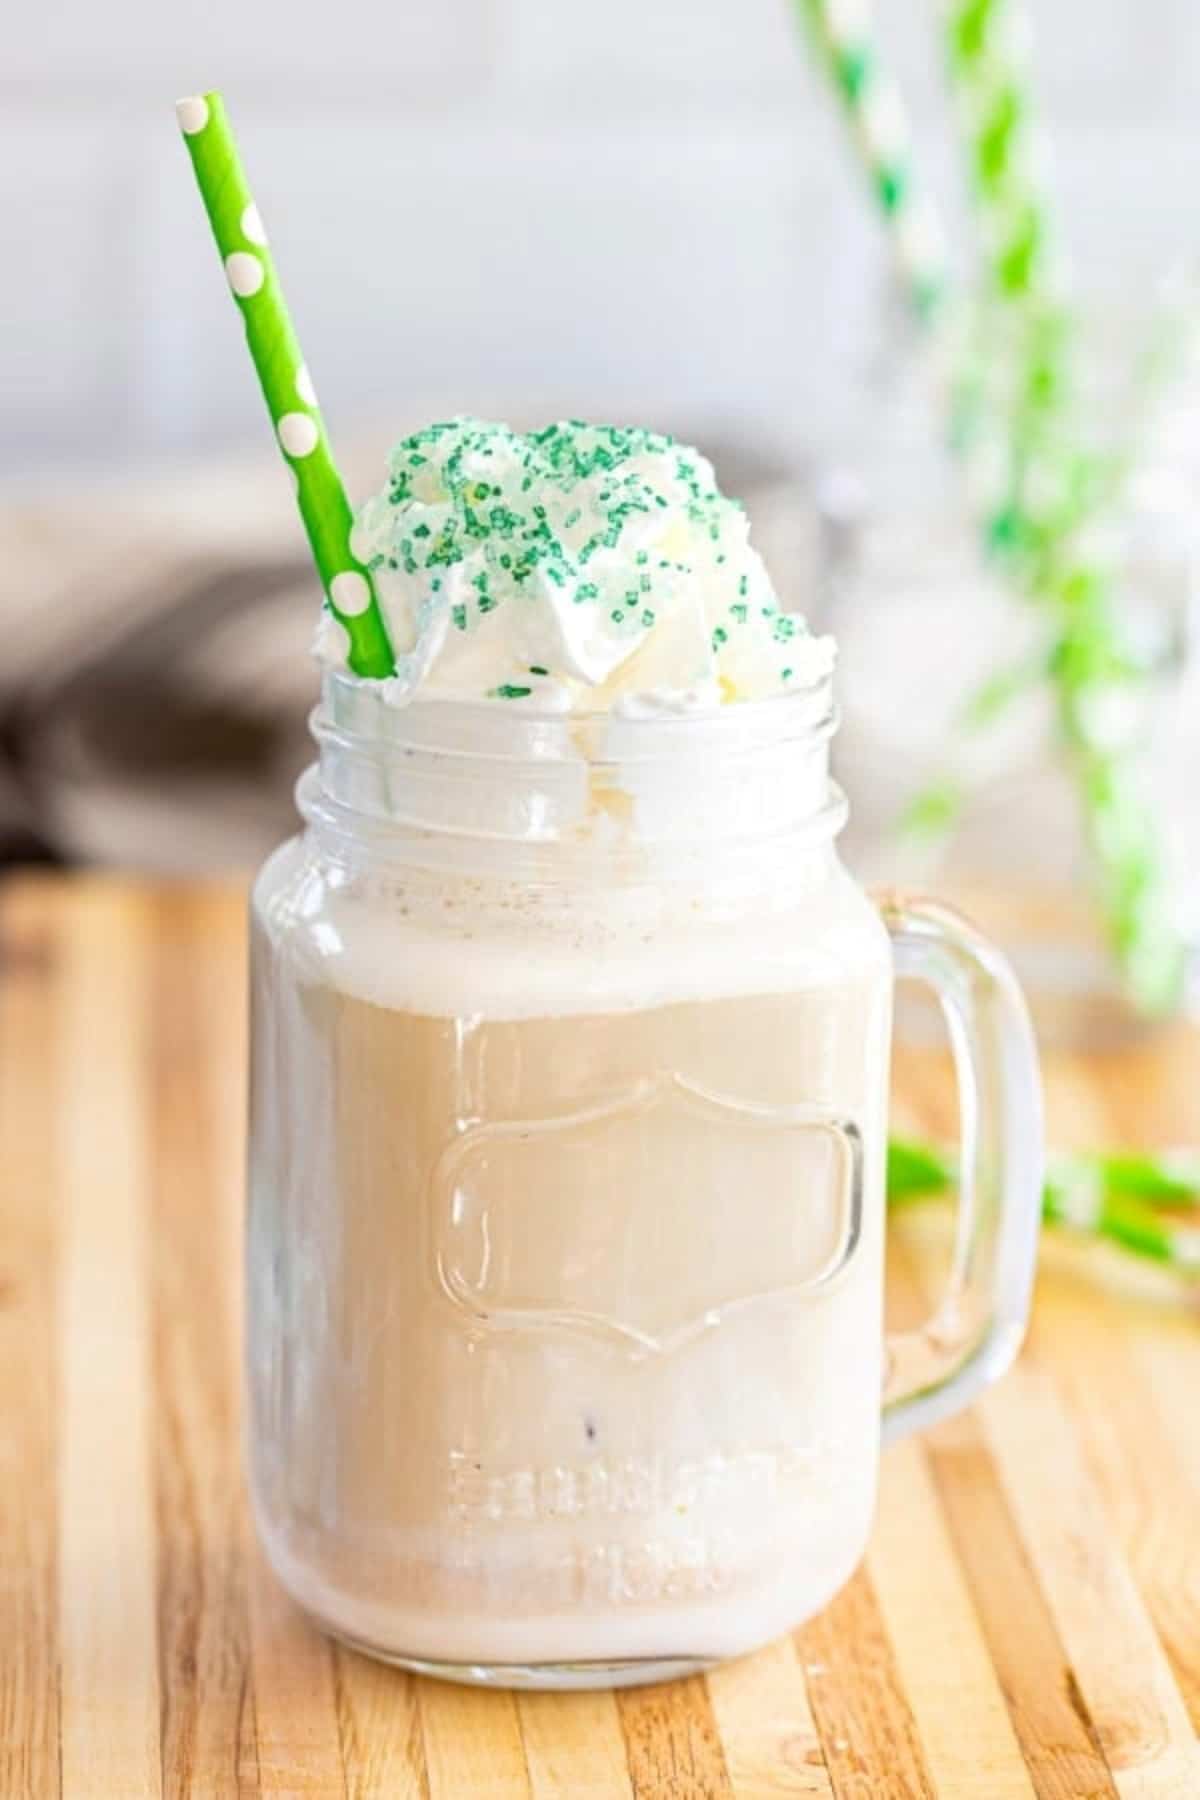 Pistachio Iced coffee served in a glass jar with a green straw.